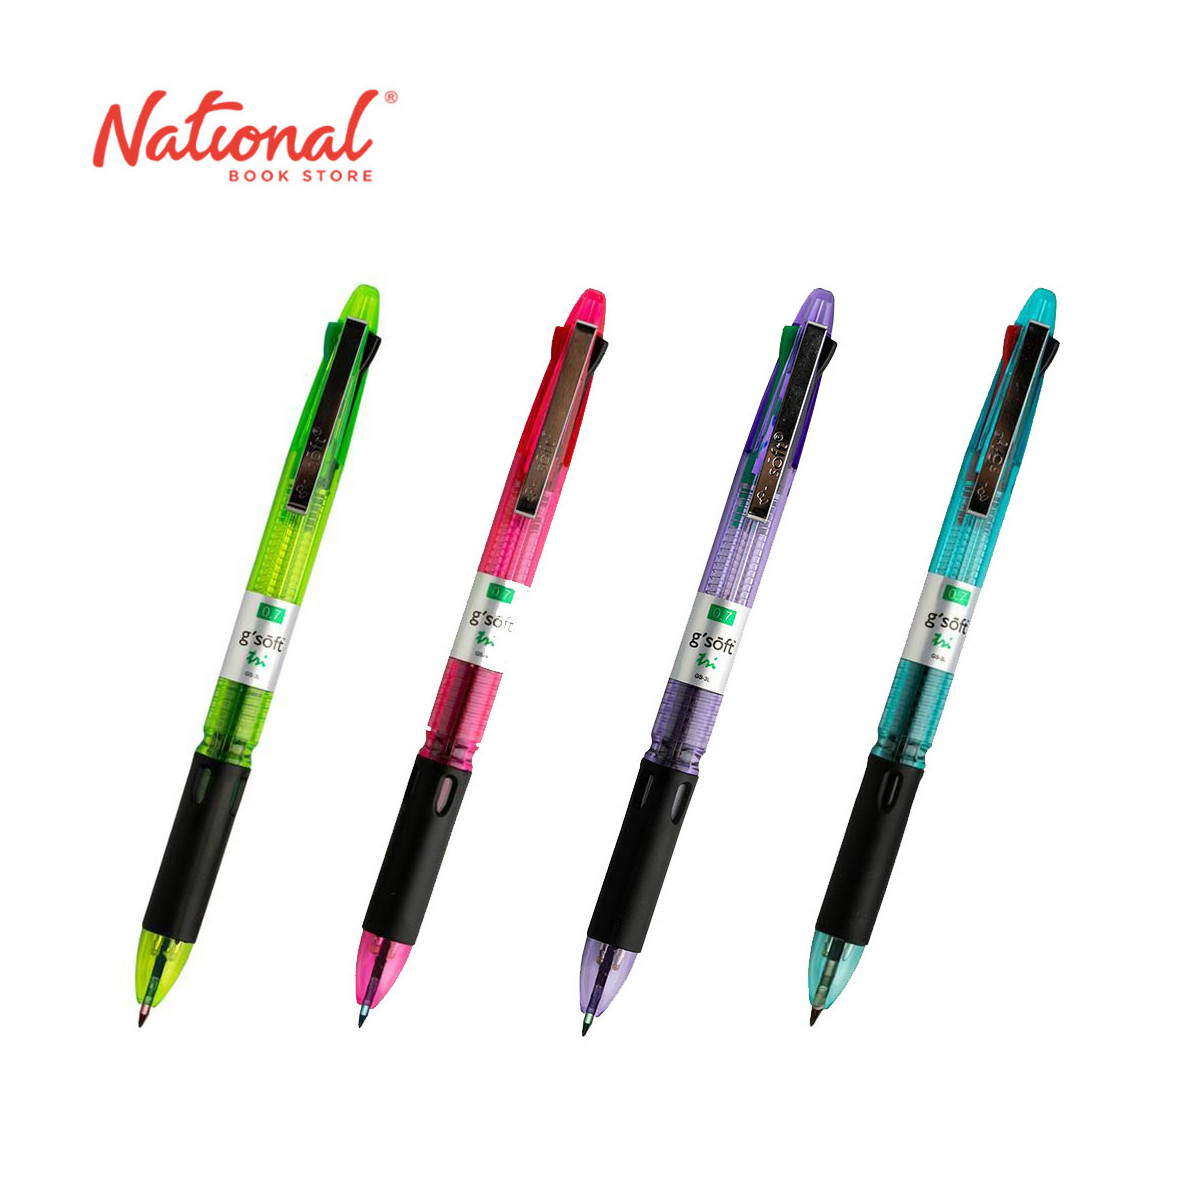 G-Soft 3-Colors Ballpoint Pen Retractable With Grip GS3L Ballpen (barrel color may vary)